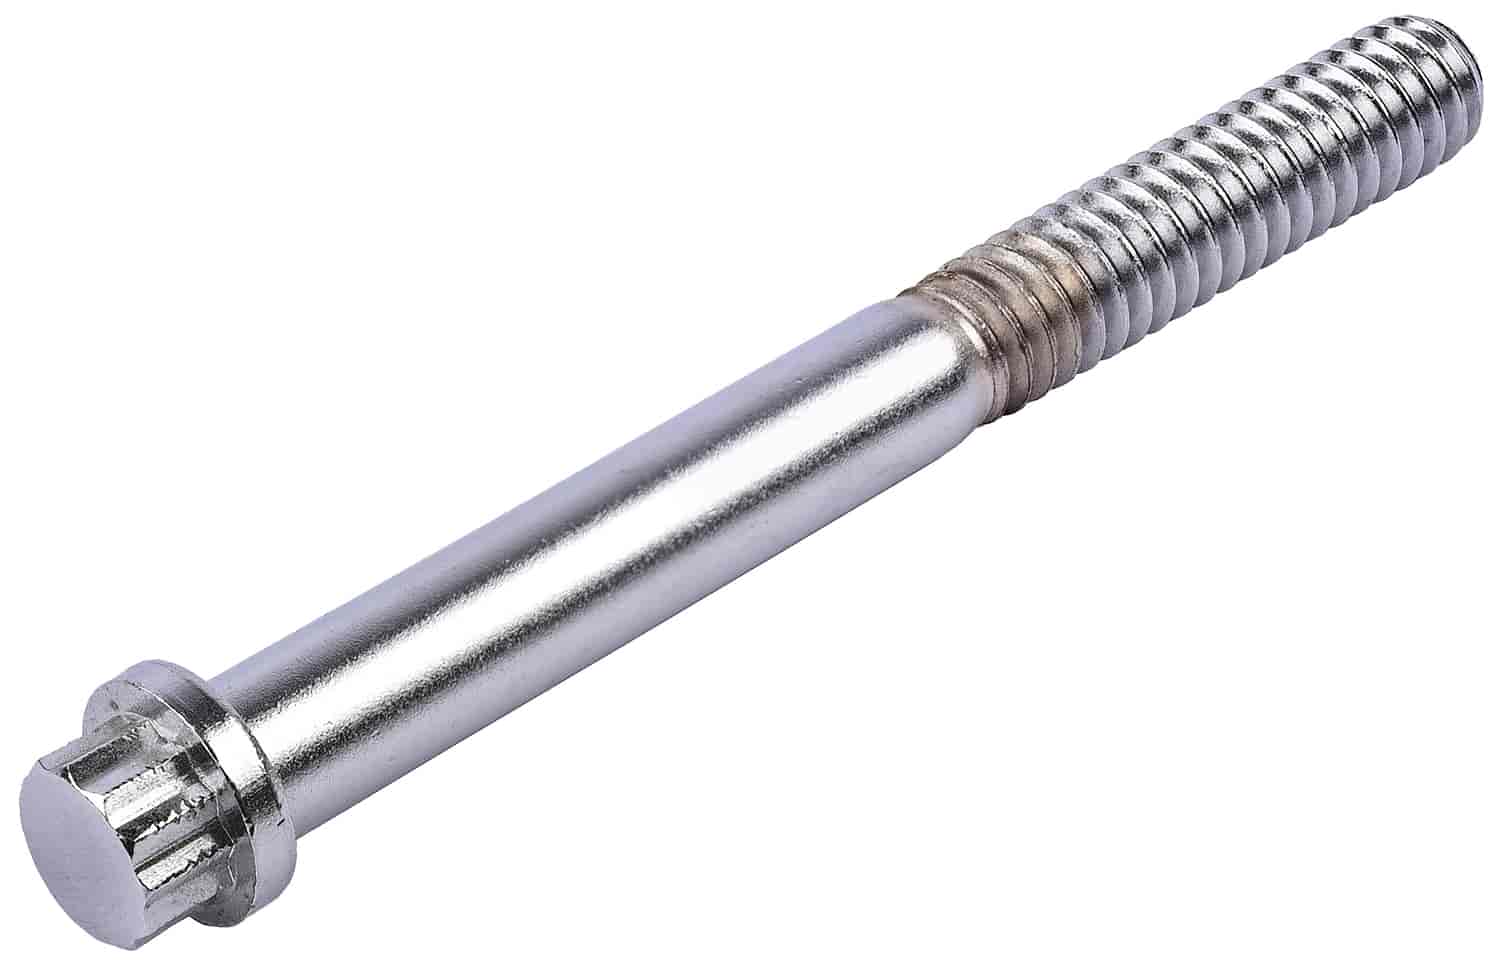 12-Point Fastener [1/4 in. -20 Thread x 2 1/2 (.500) in. Length]